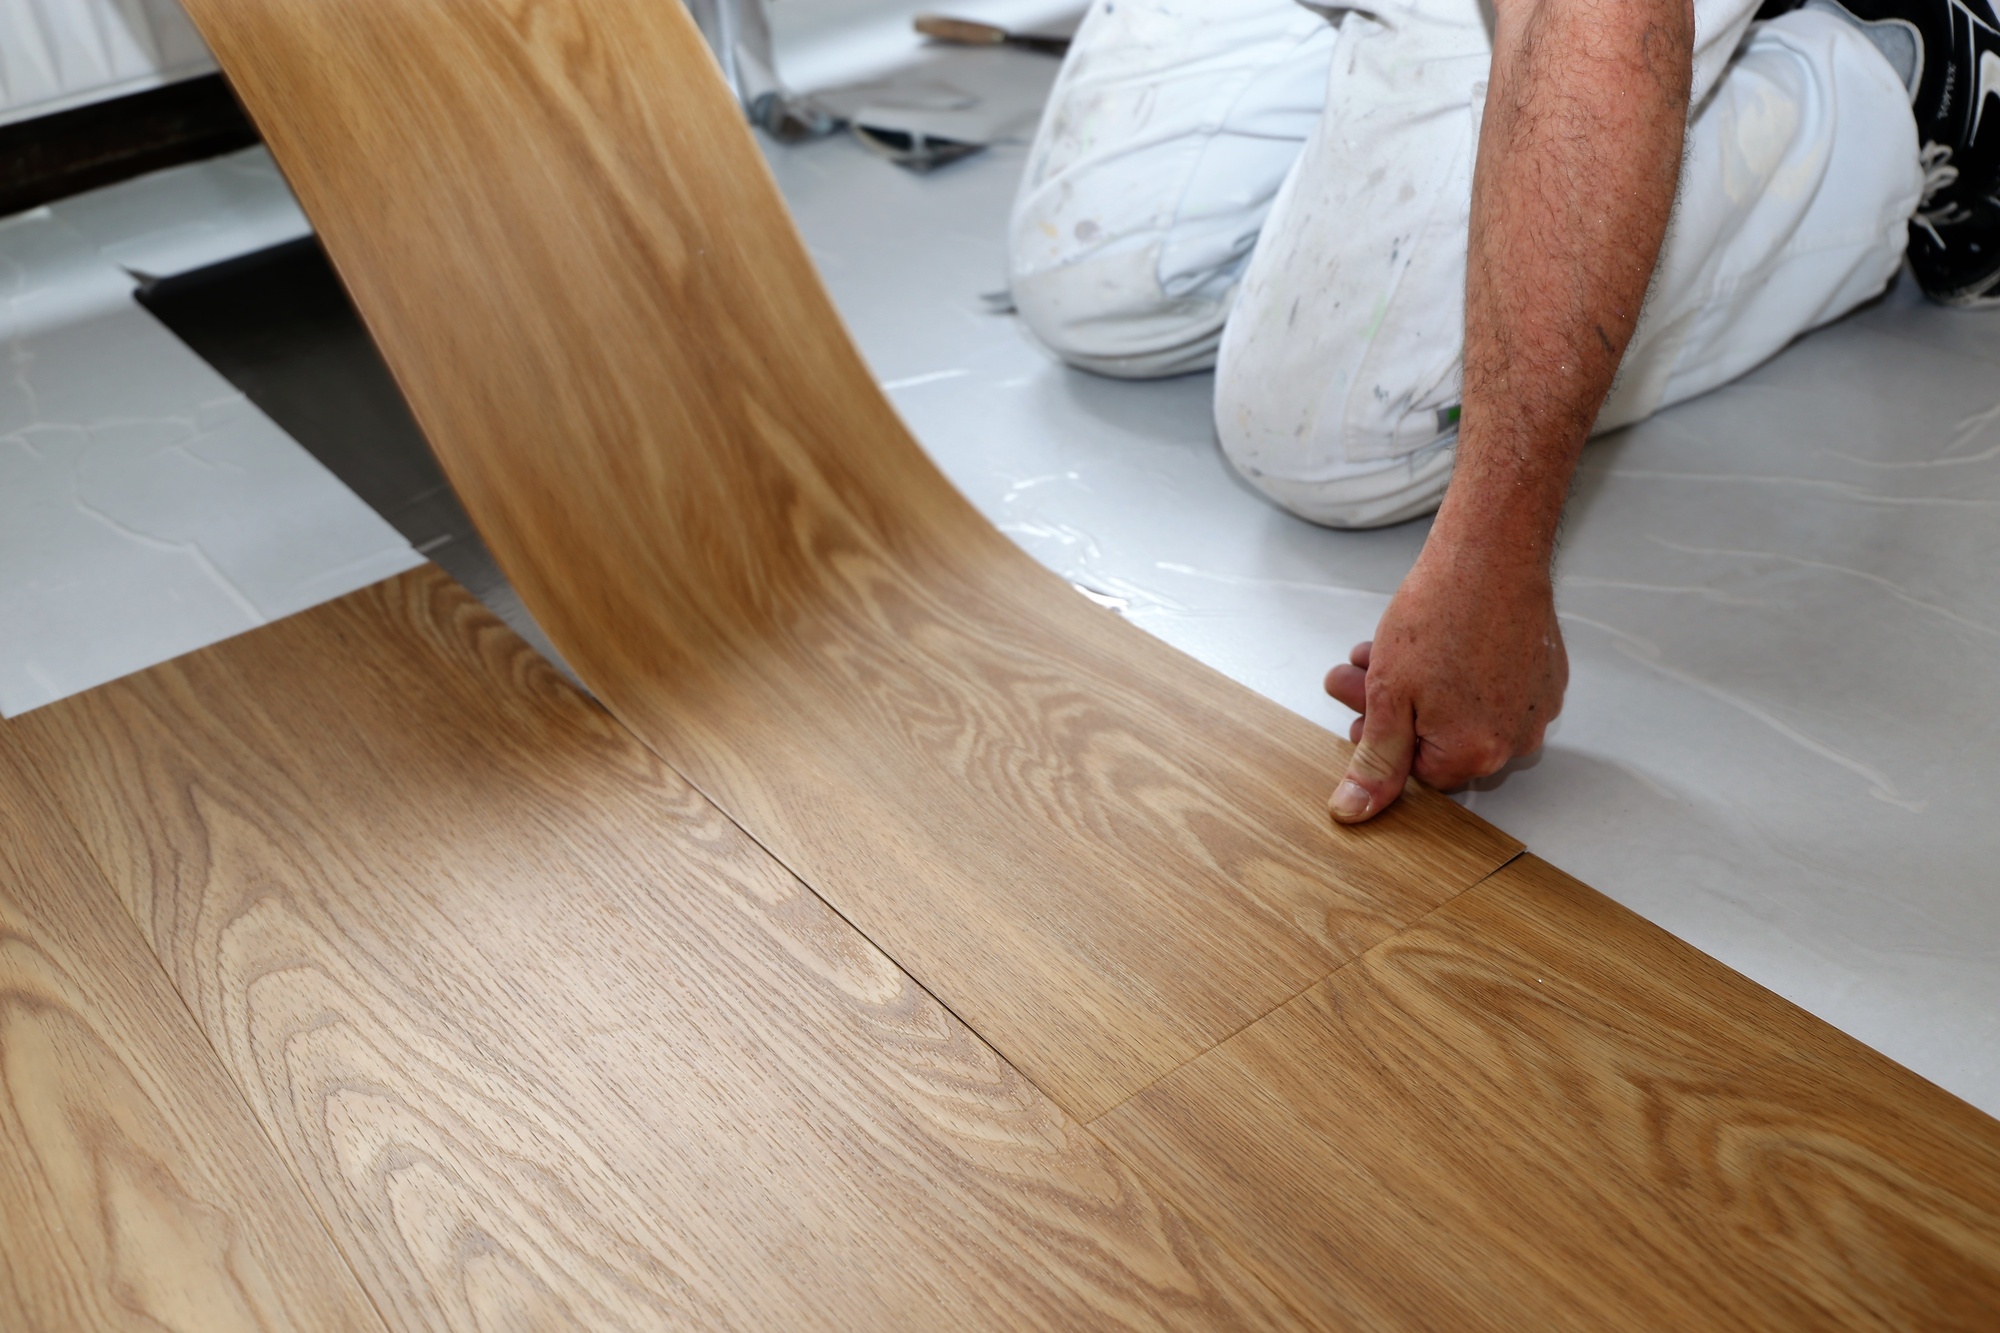 If you are searching for the best flooring material, then look no further than vinyl. Here are 5 amazing benefits of vinyl flooring installation.